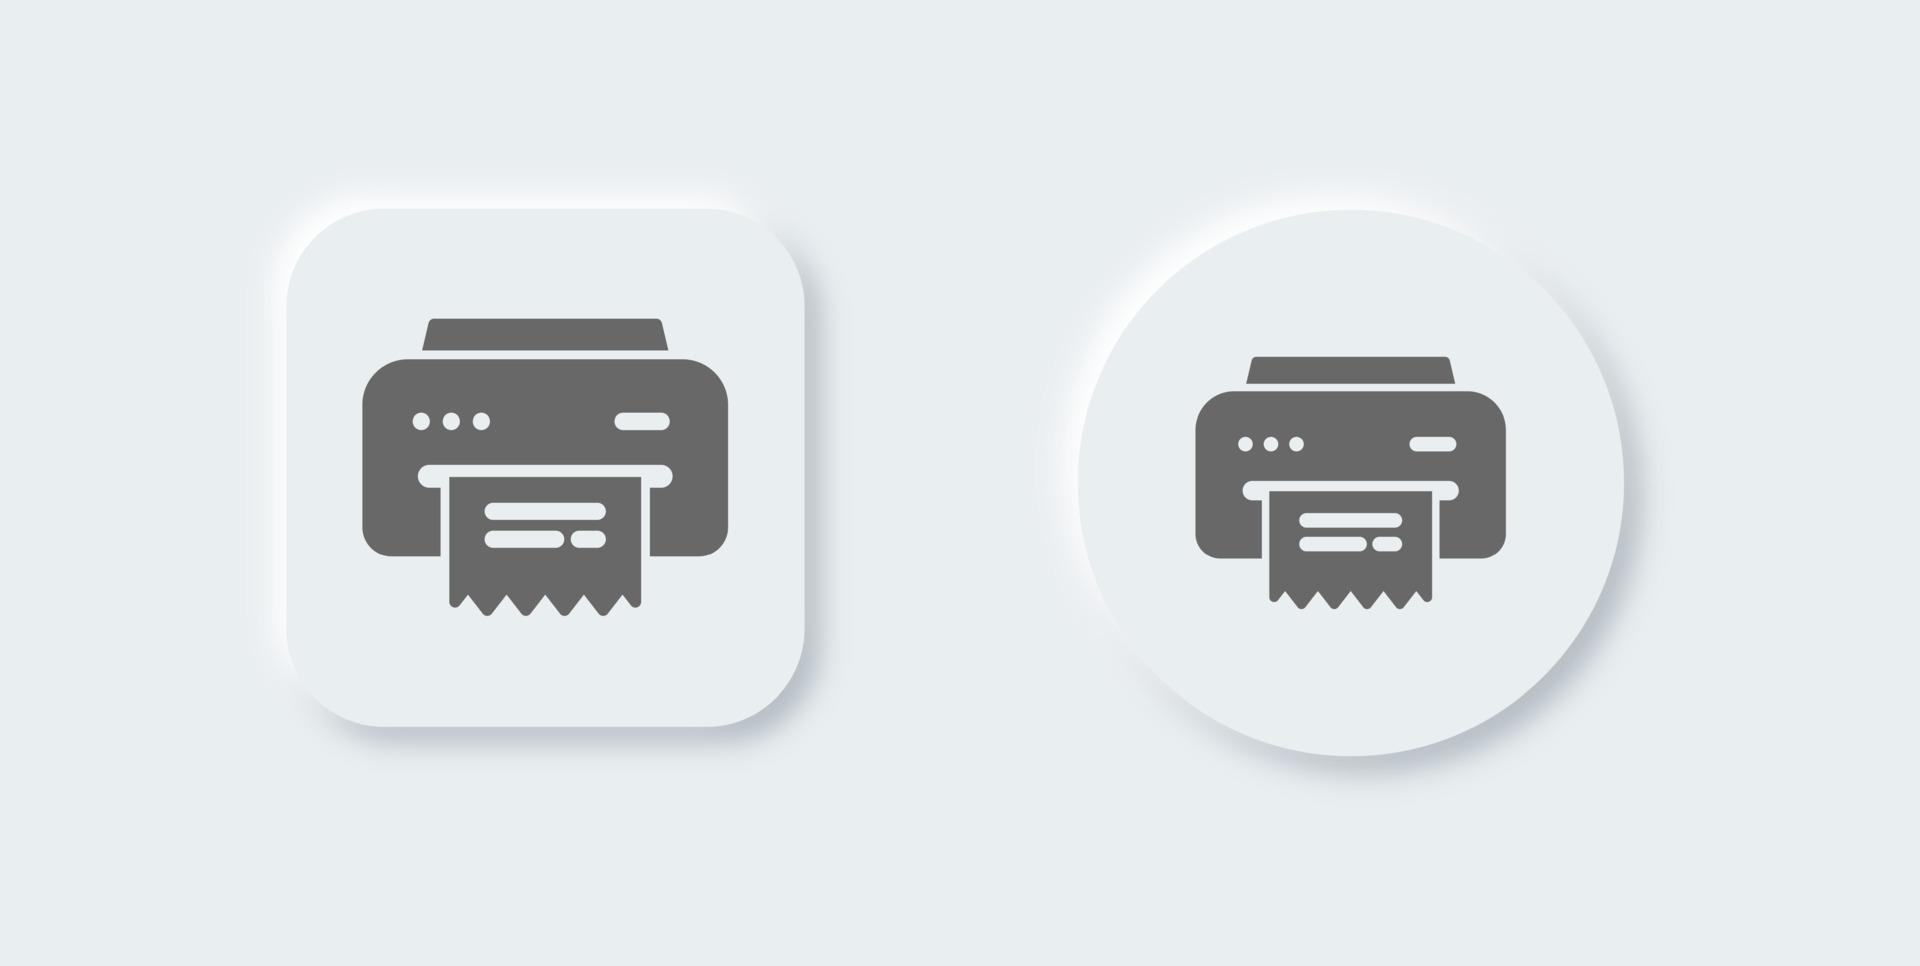 Printer solid icon in neomorphic design style. Office signs vector illustration.